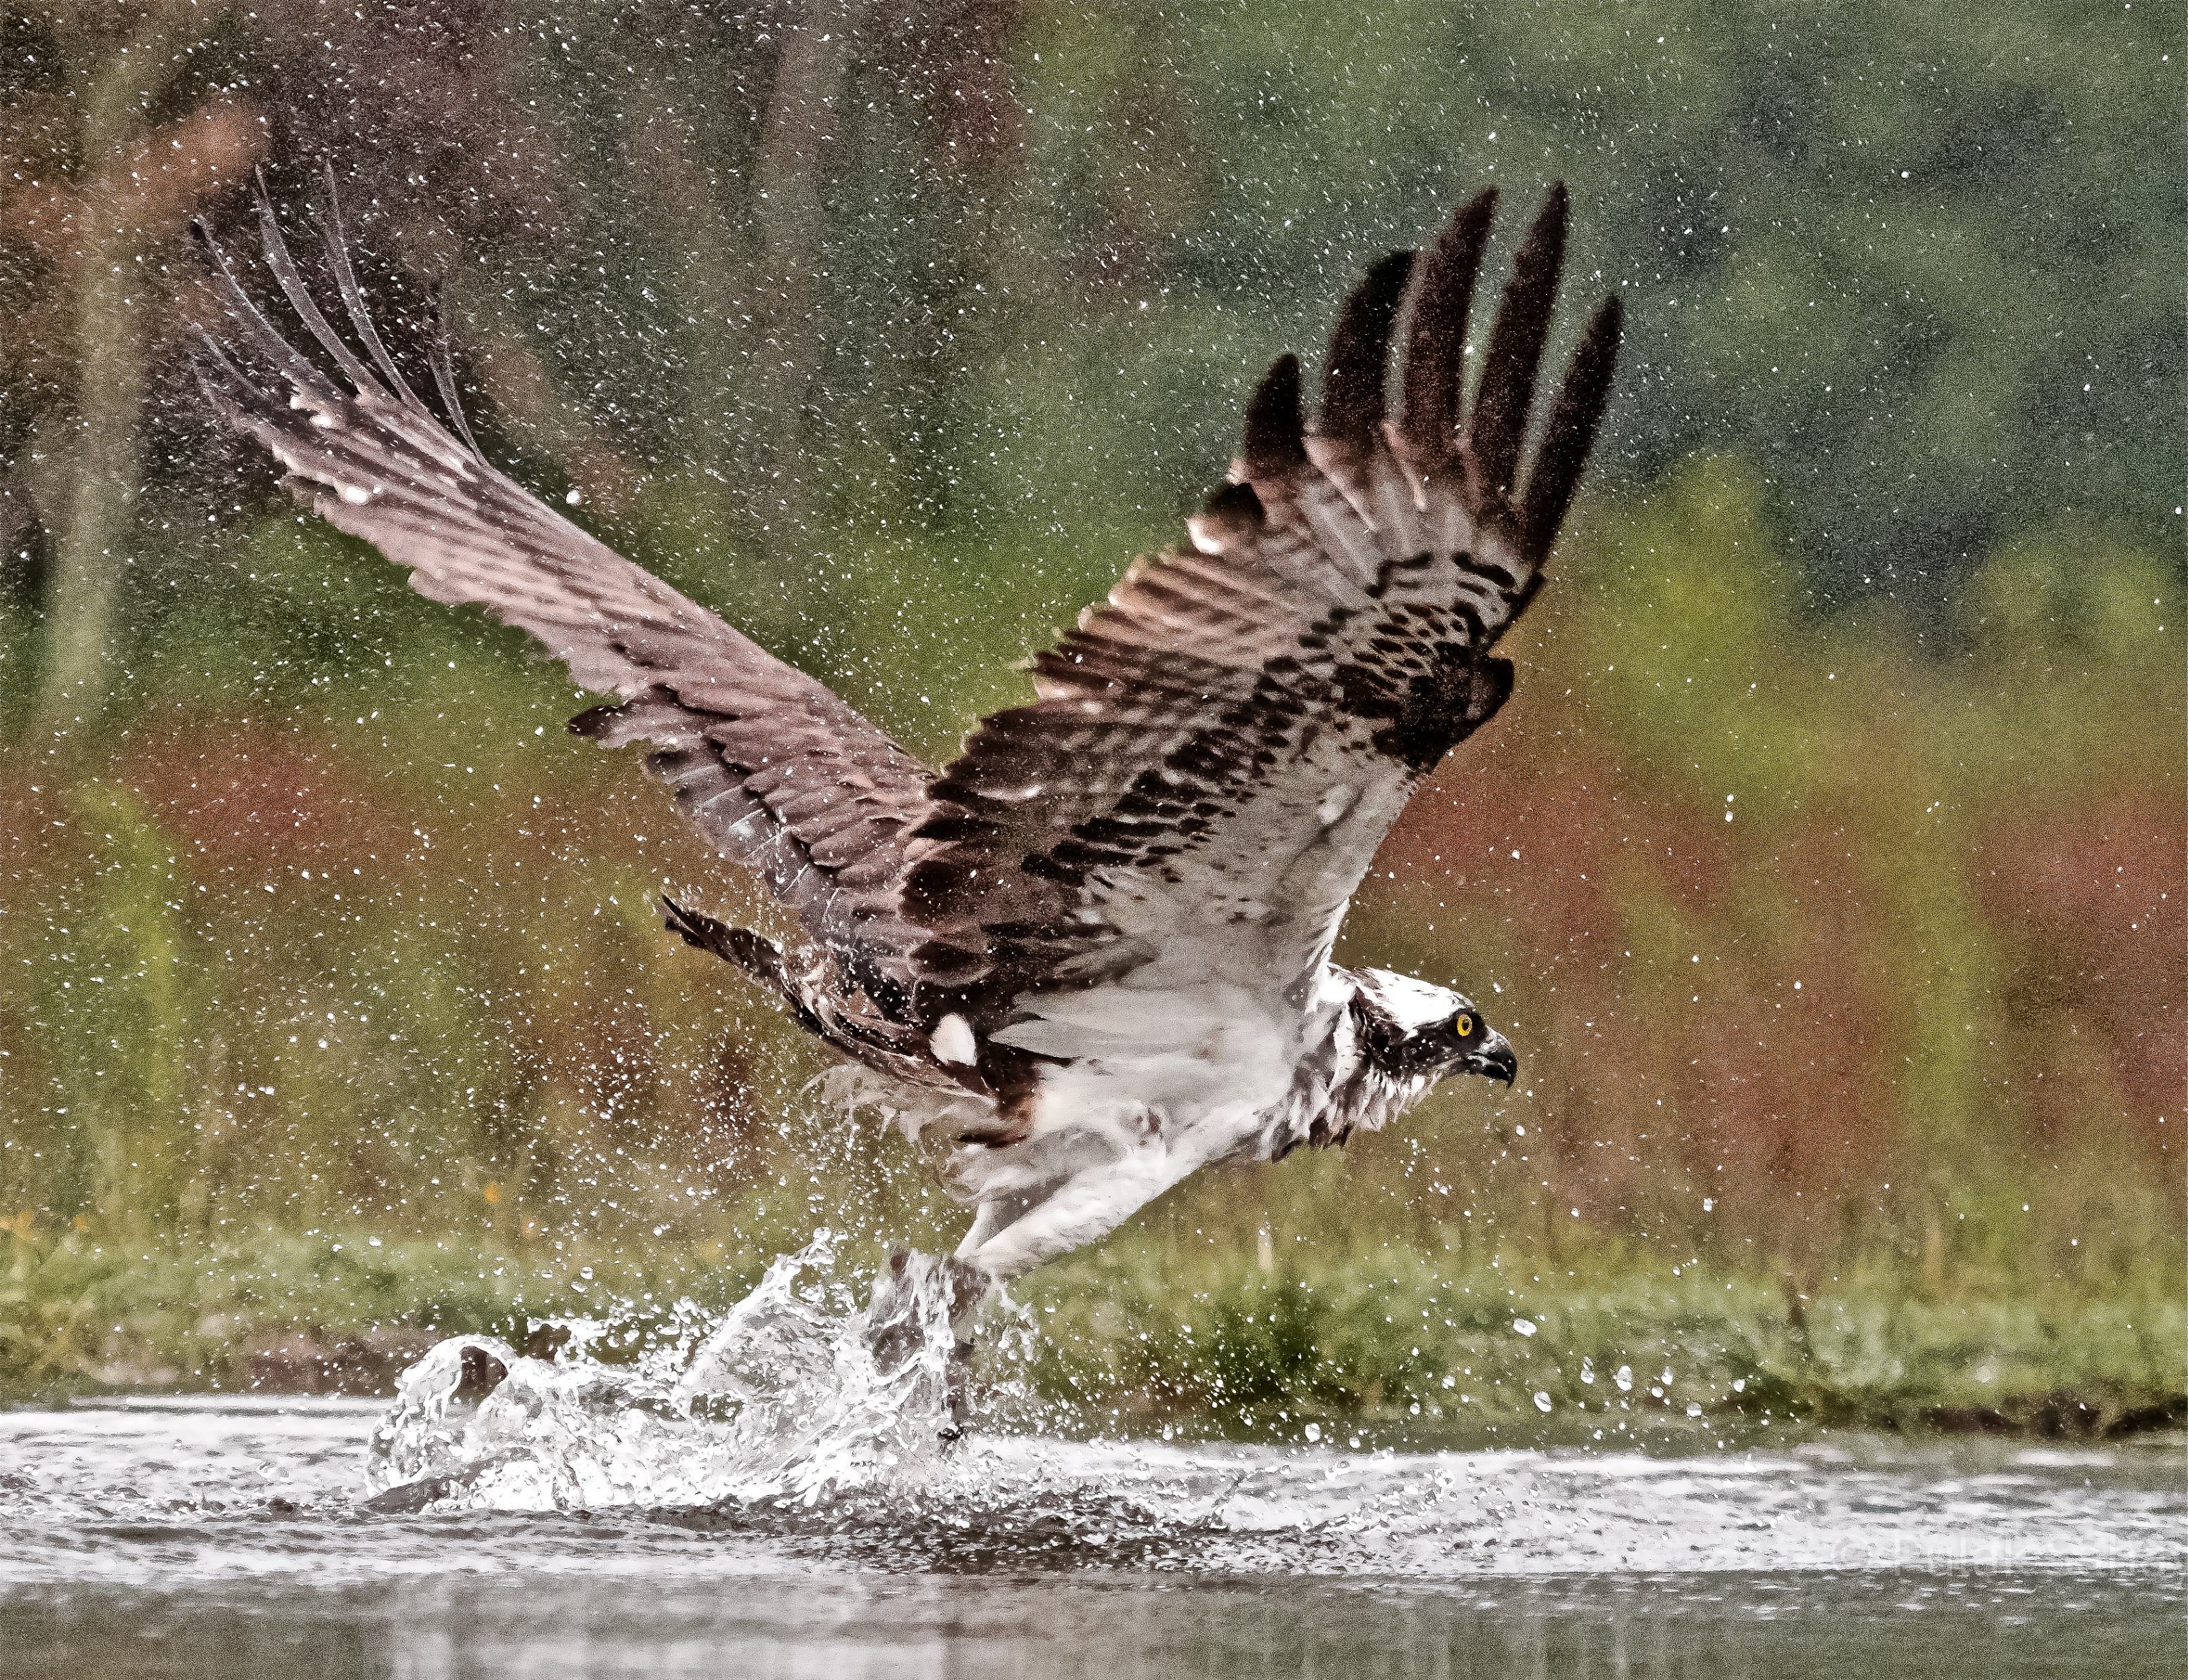 Osprey swoops to fish